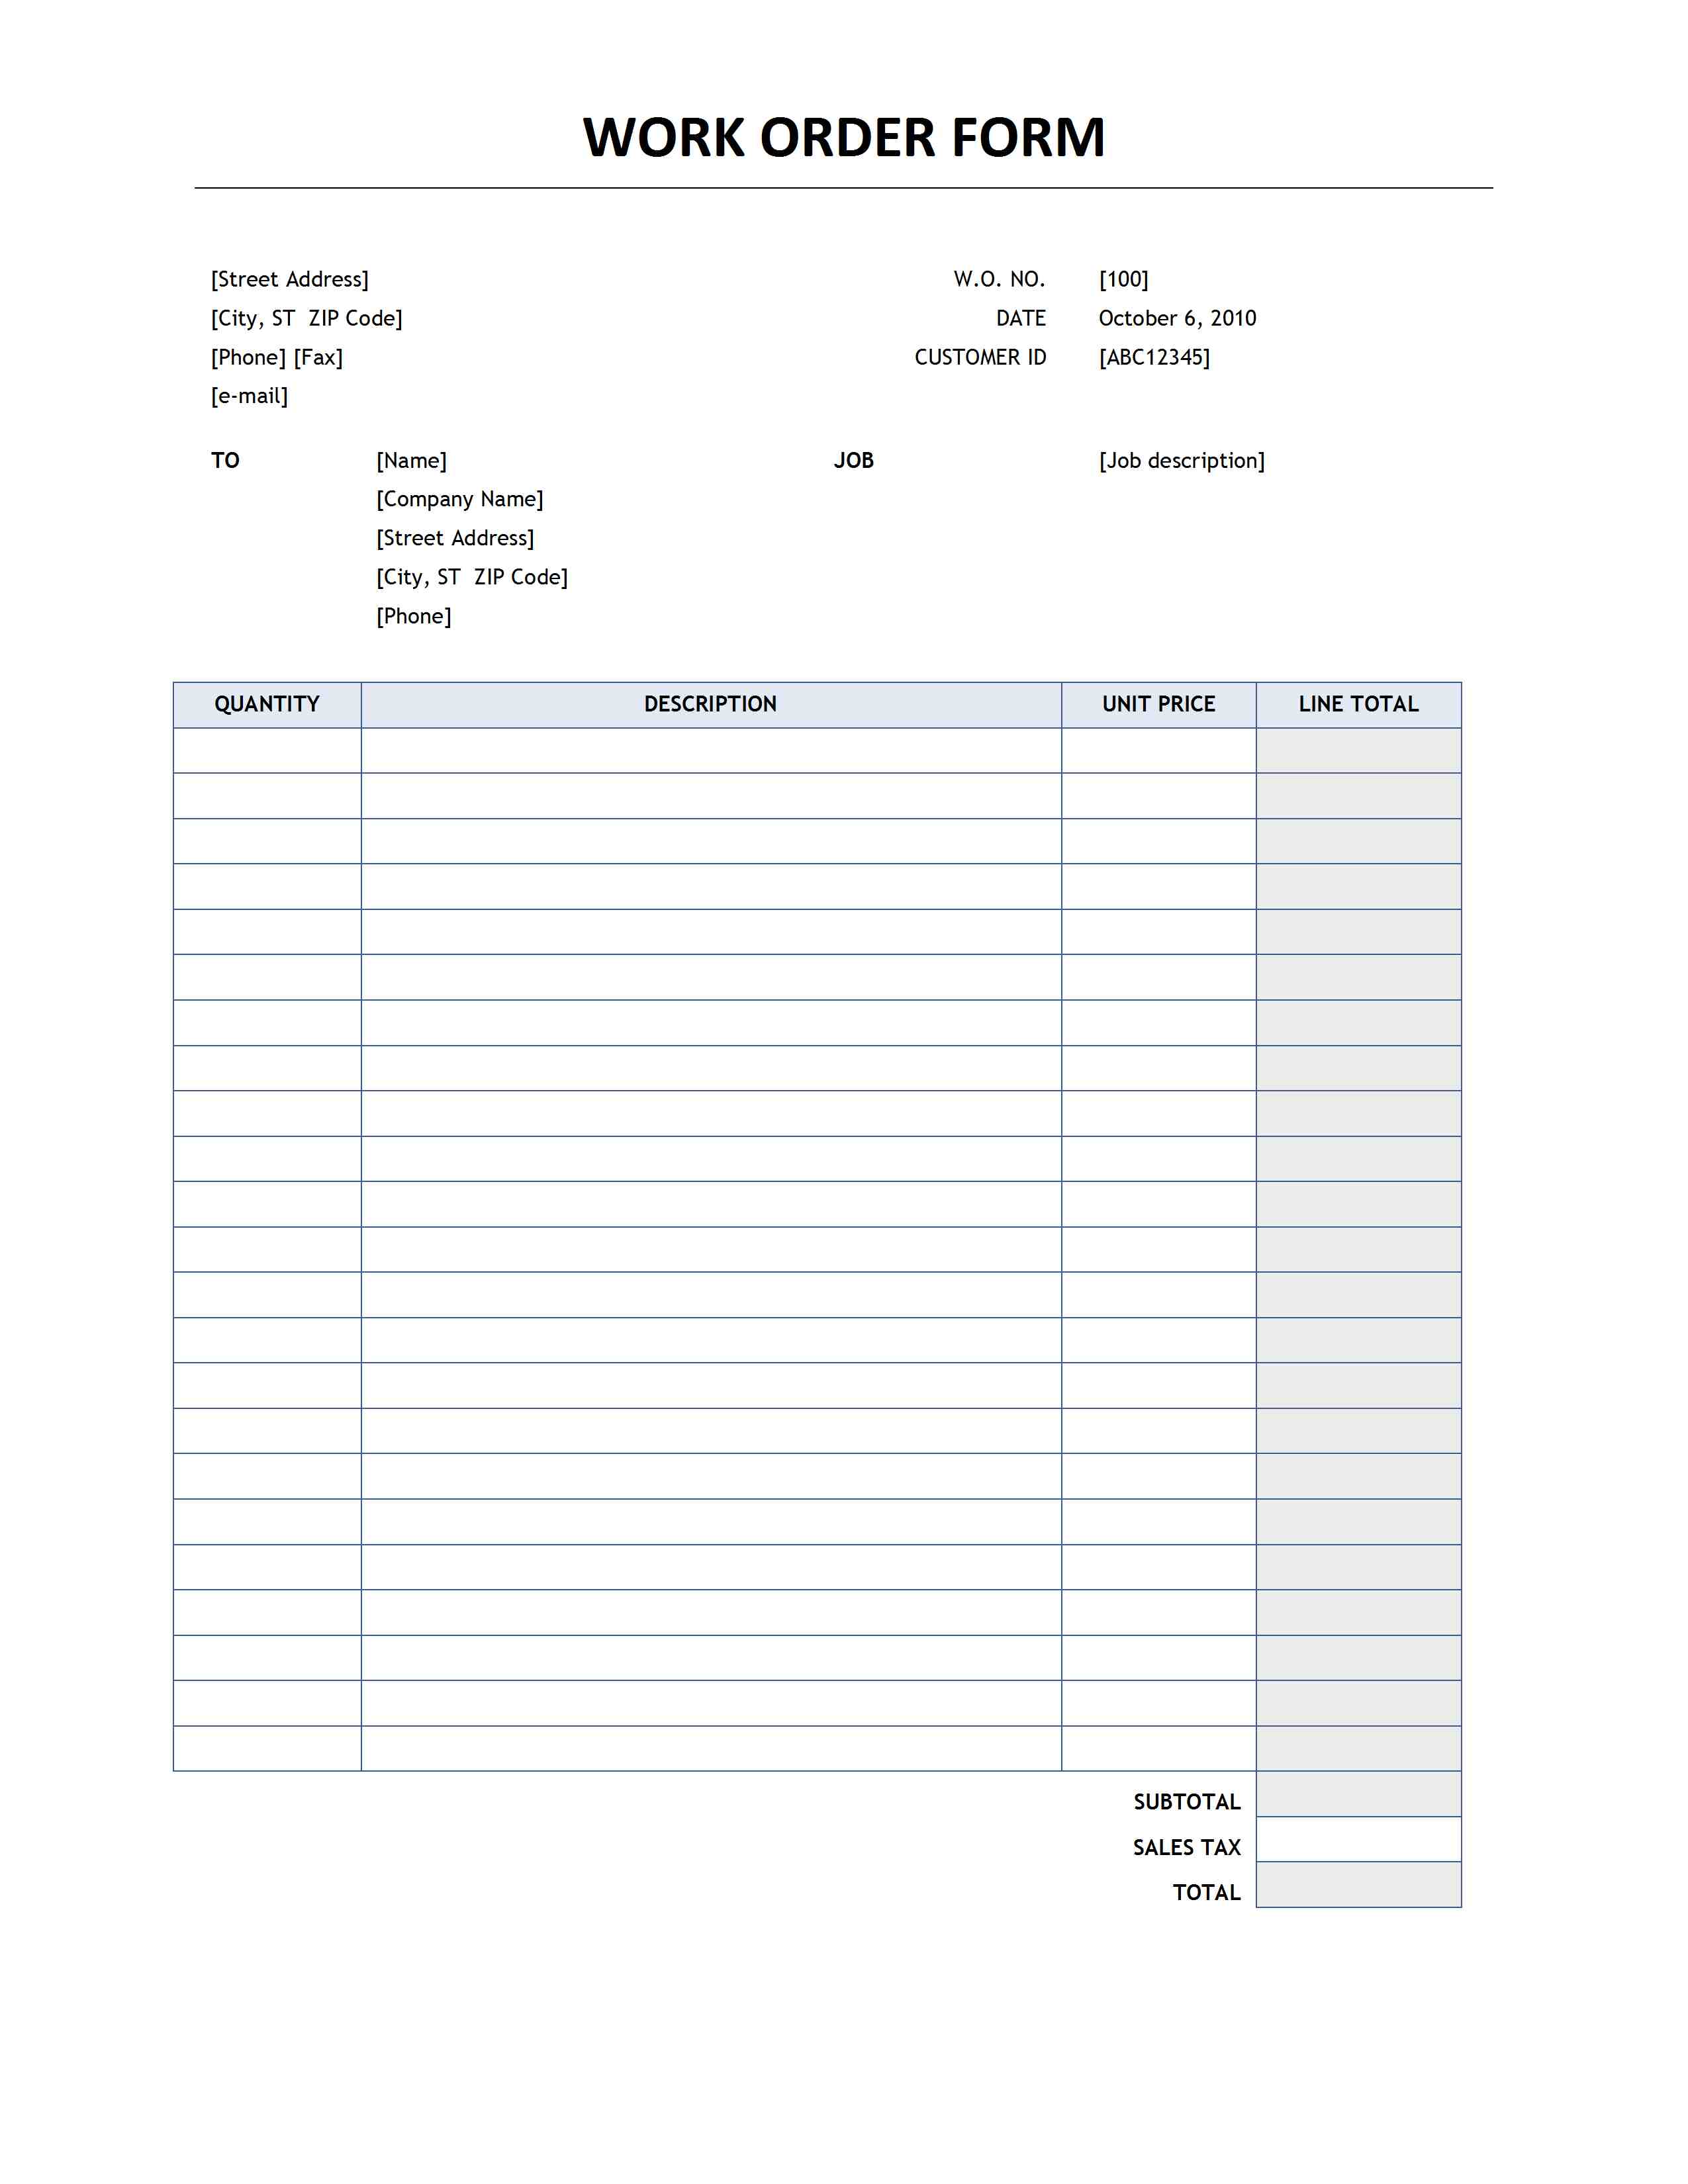 Work Order Template: Free Download, Create, Edit, Fill and Print 